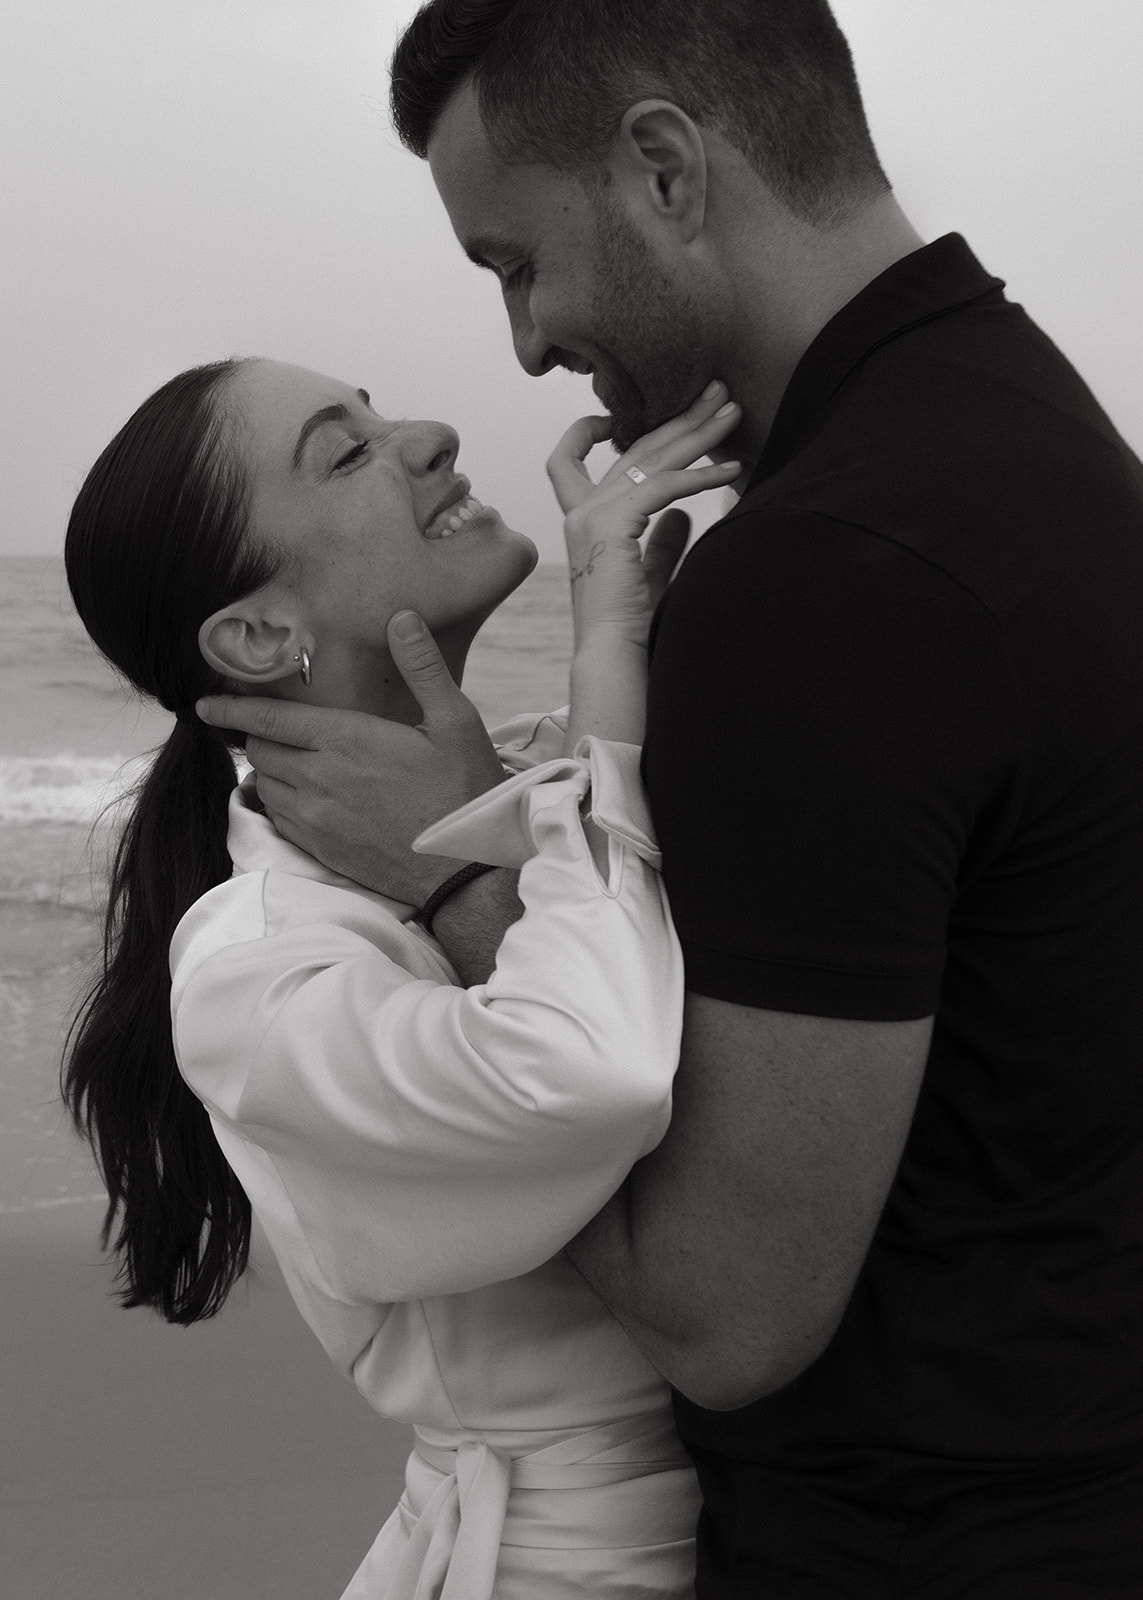 A romantic couple engagement session on a New Jersey beach